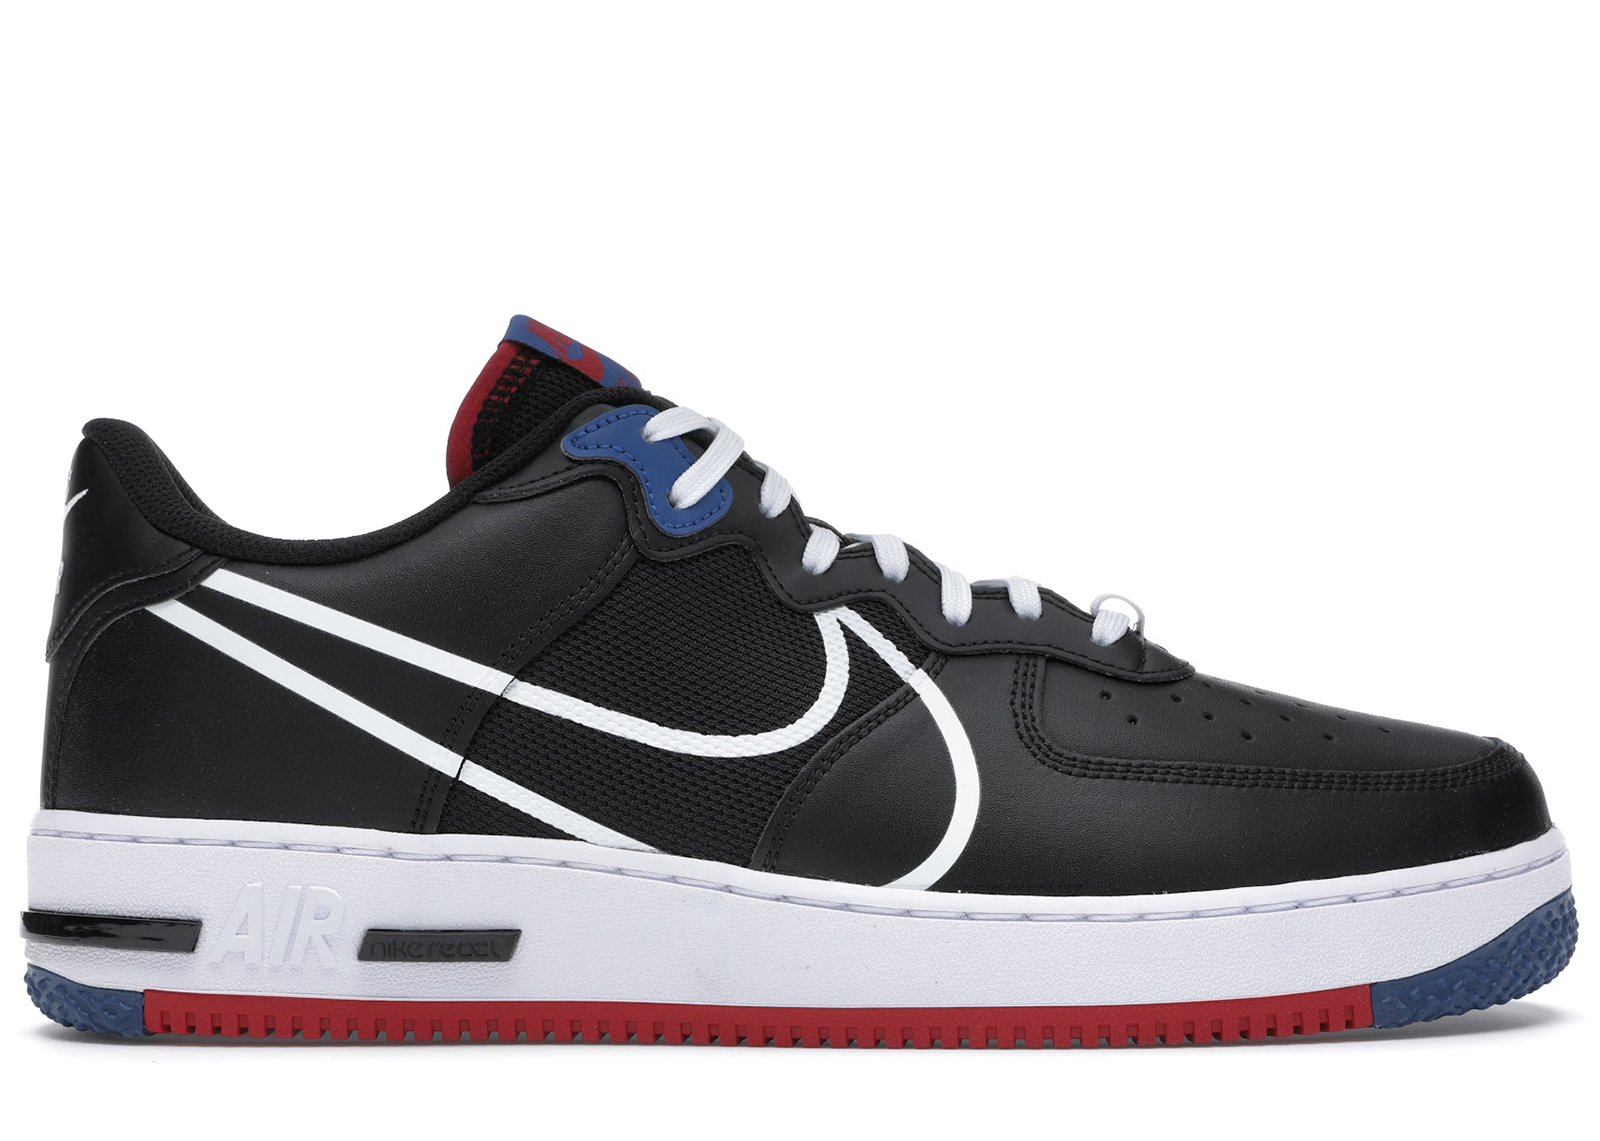 Nike Air Force 1 Low React Black White Gym Red Gym Blue - CT1020-001